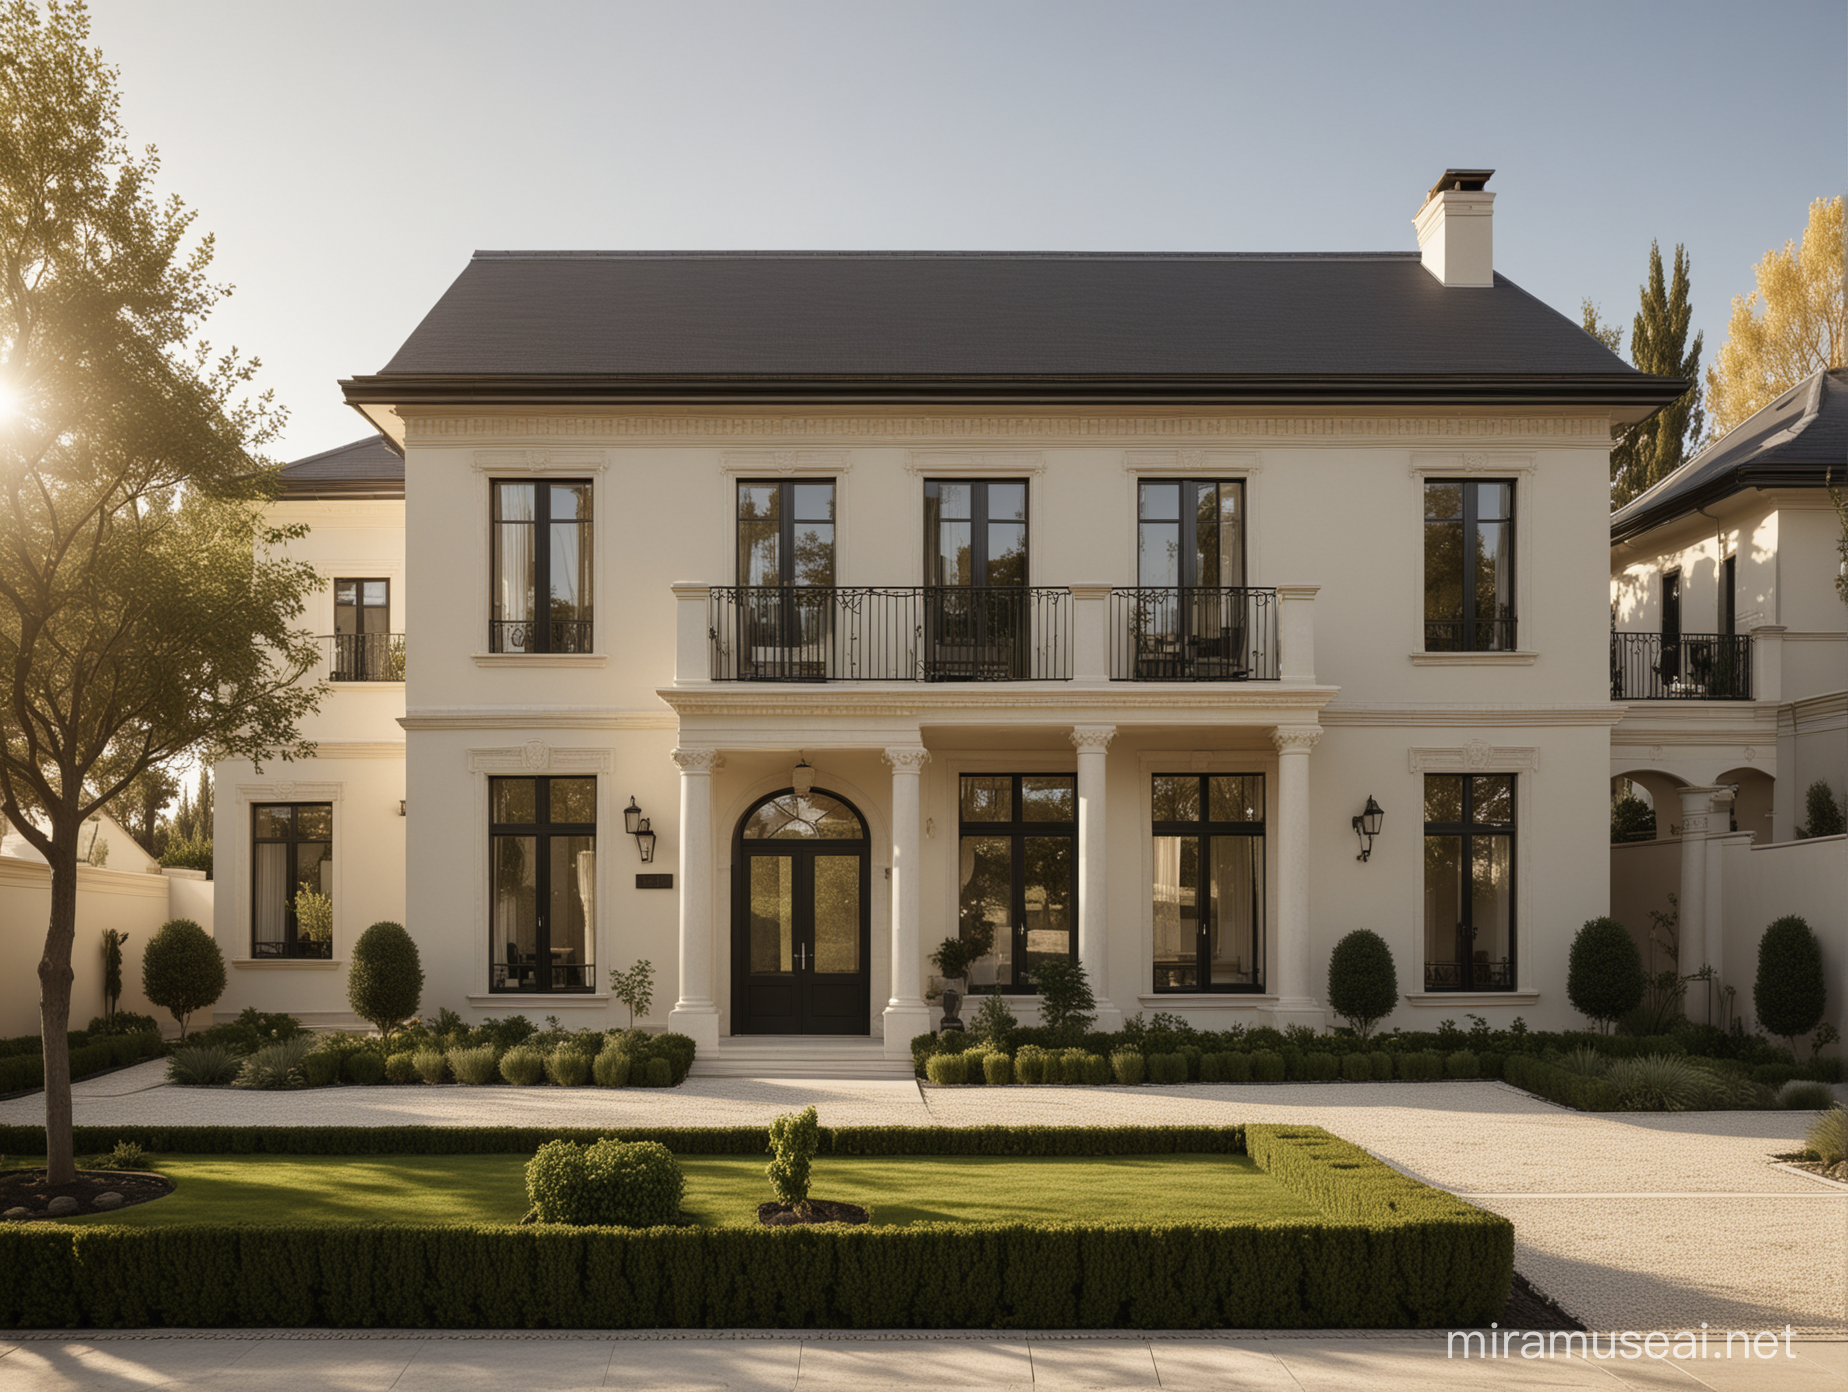 Grand Minimalist Classical Home Exterior with Beige Render and Gardens